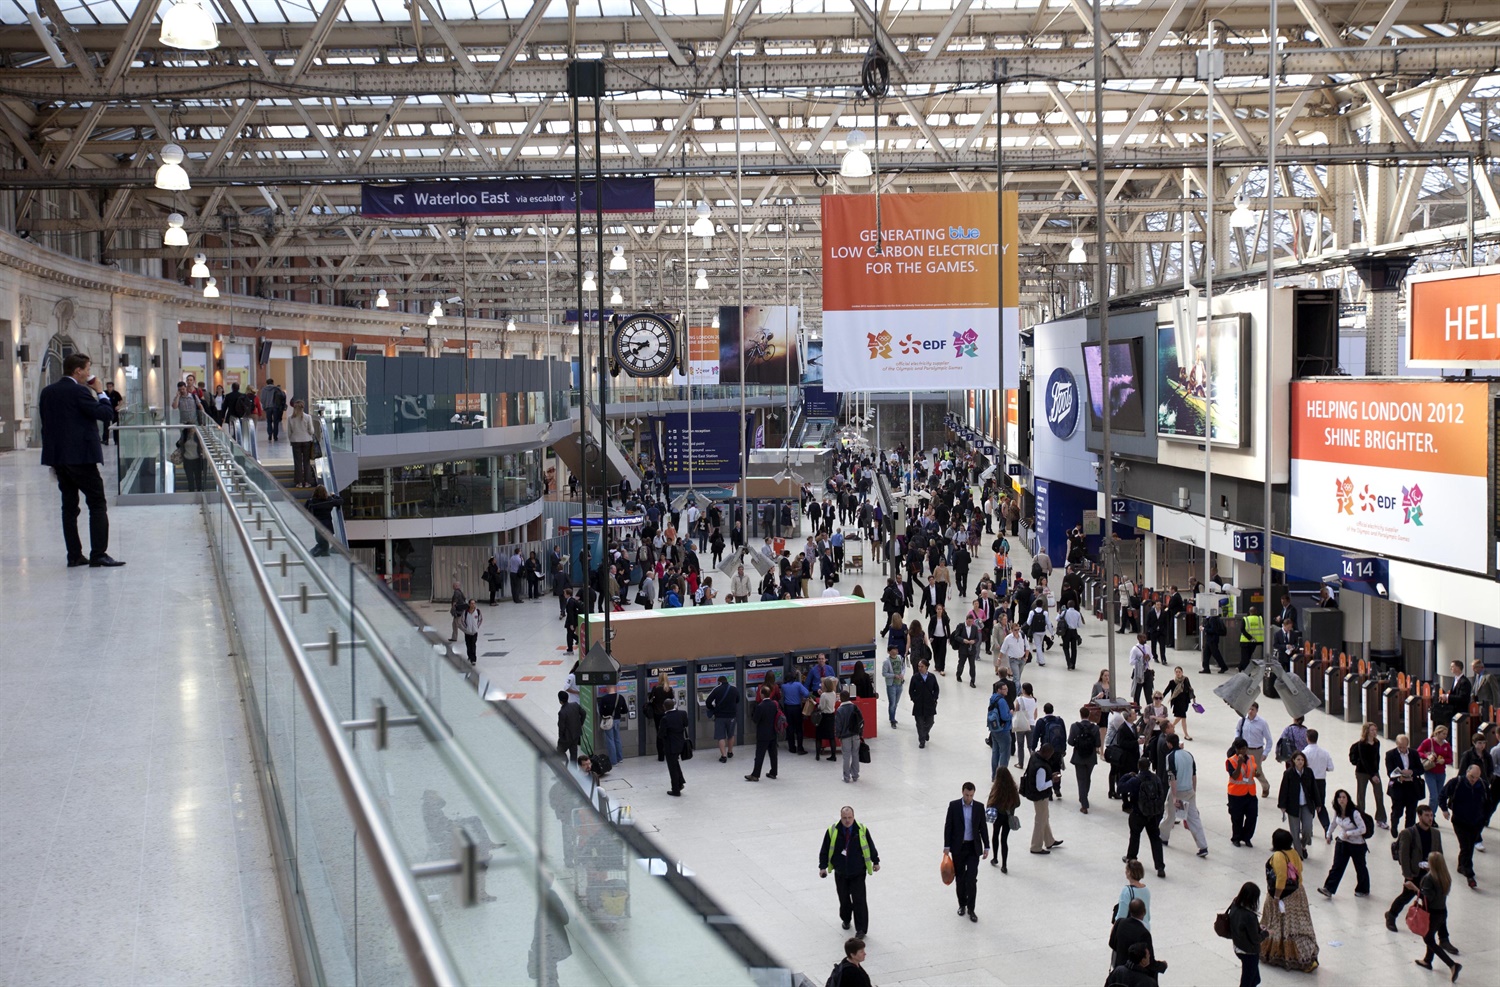 First major changes to Waterloo station since the 1930s